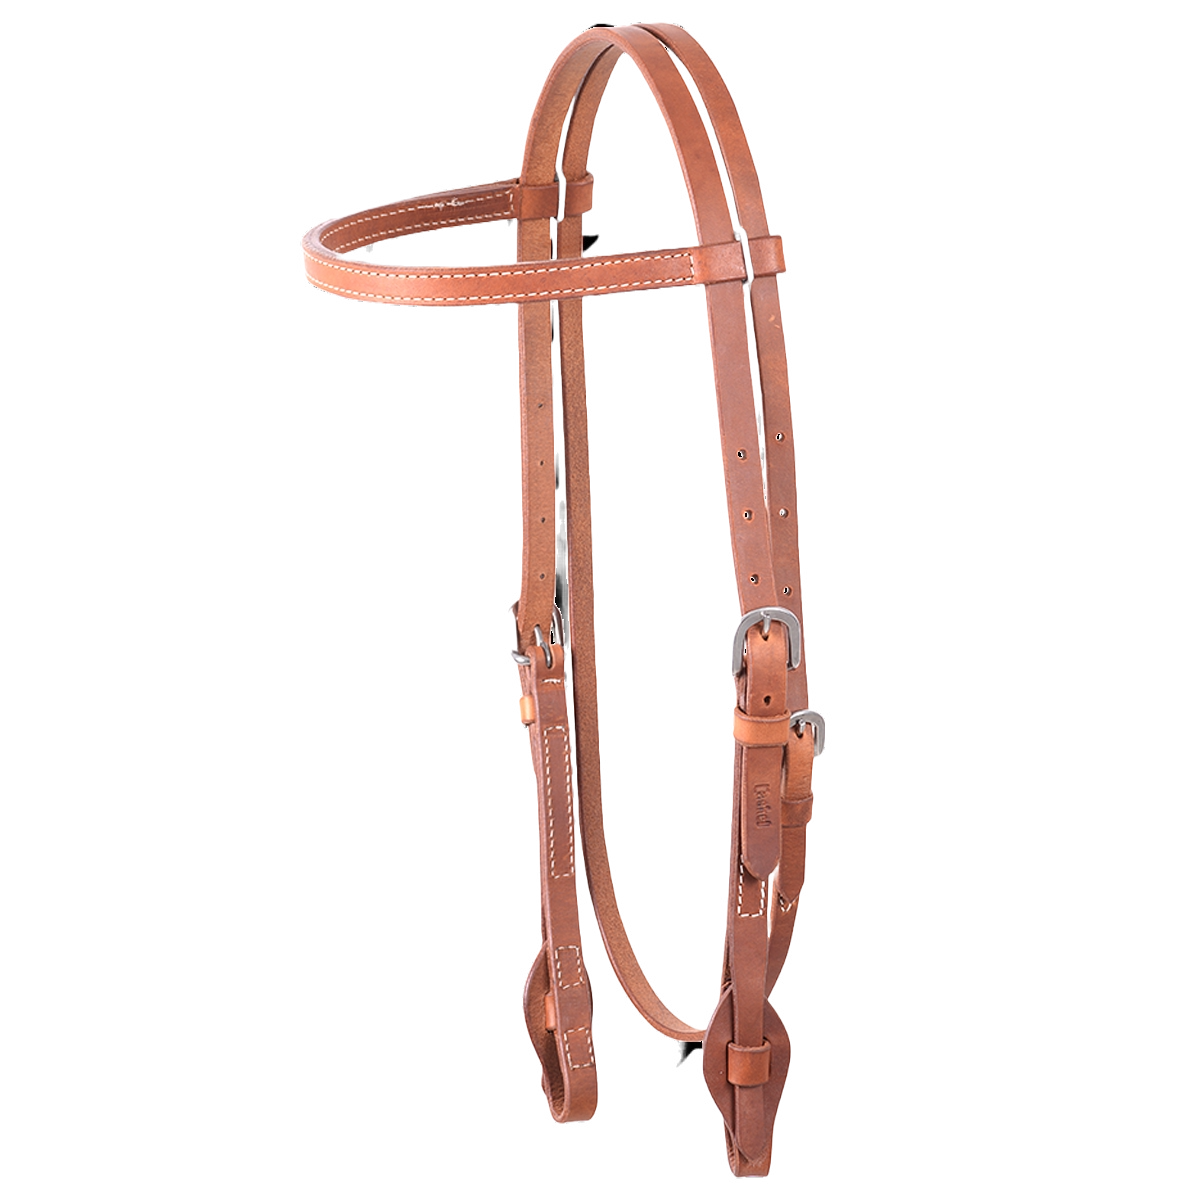 Cashel Stitched Harness Browband Headstall with Quick Change